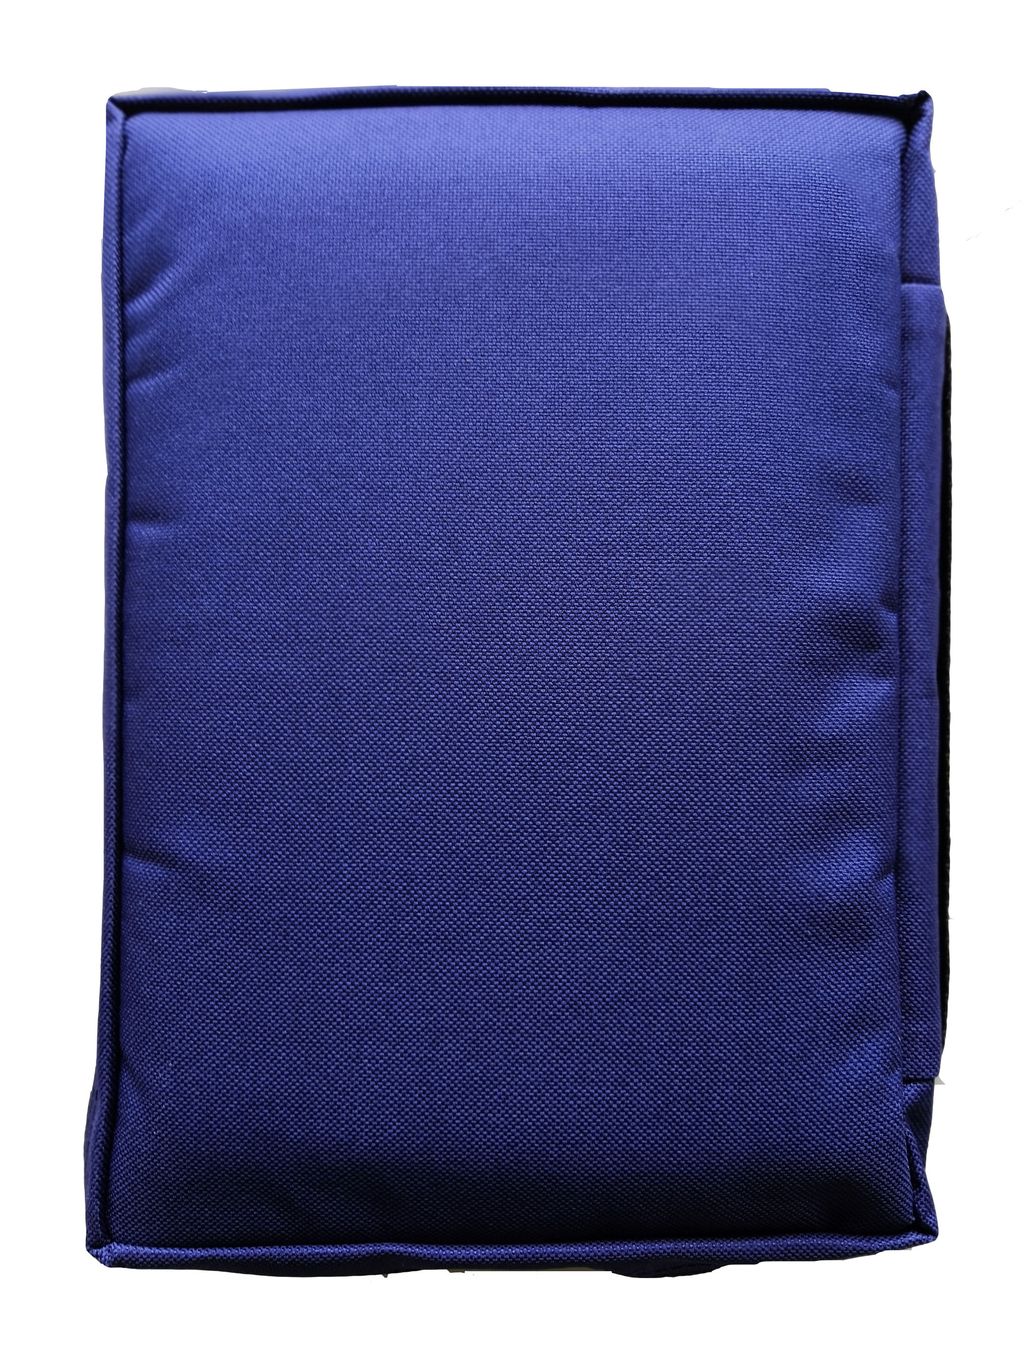 Malaysia-online-christian-bookstore-faith-book-store-bible-cover-圣经套-size-X-blue-2-800x800.png.jpg